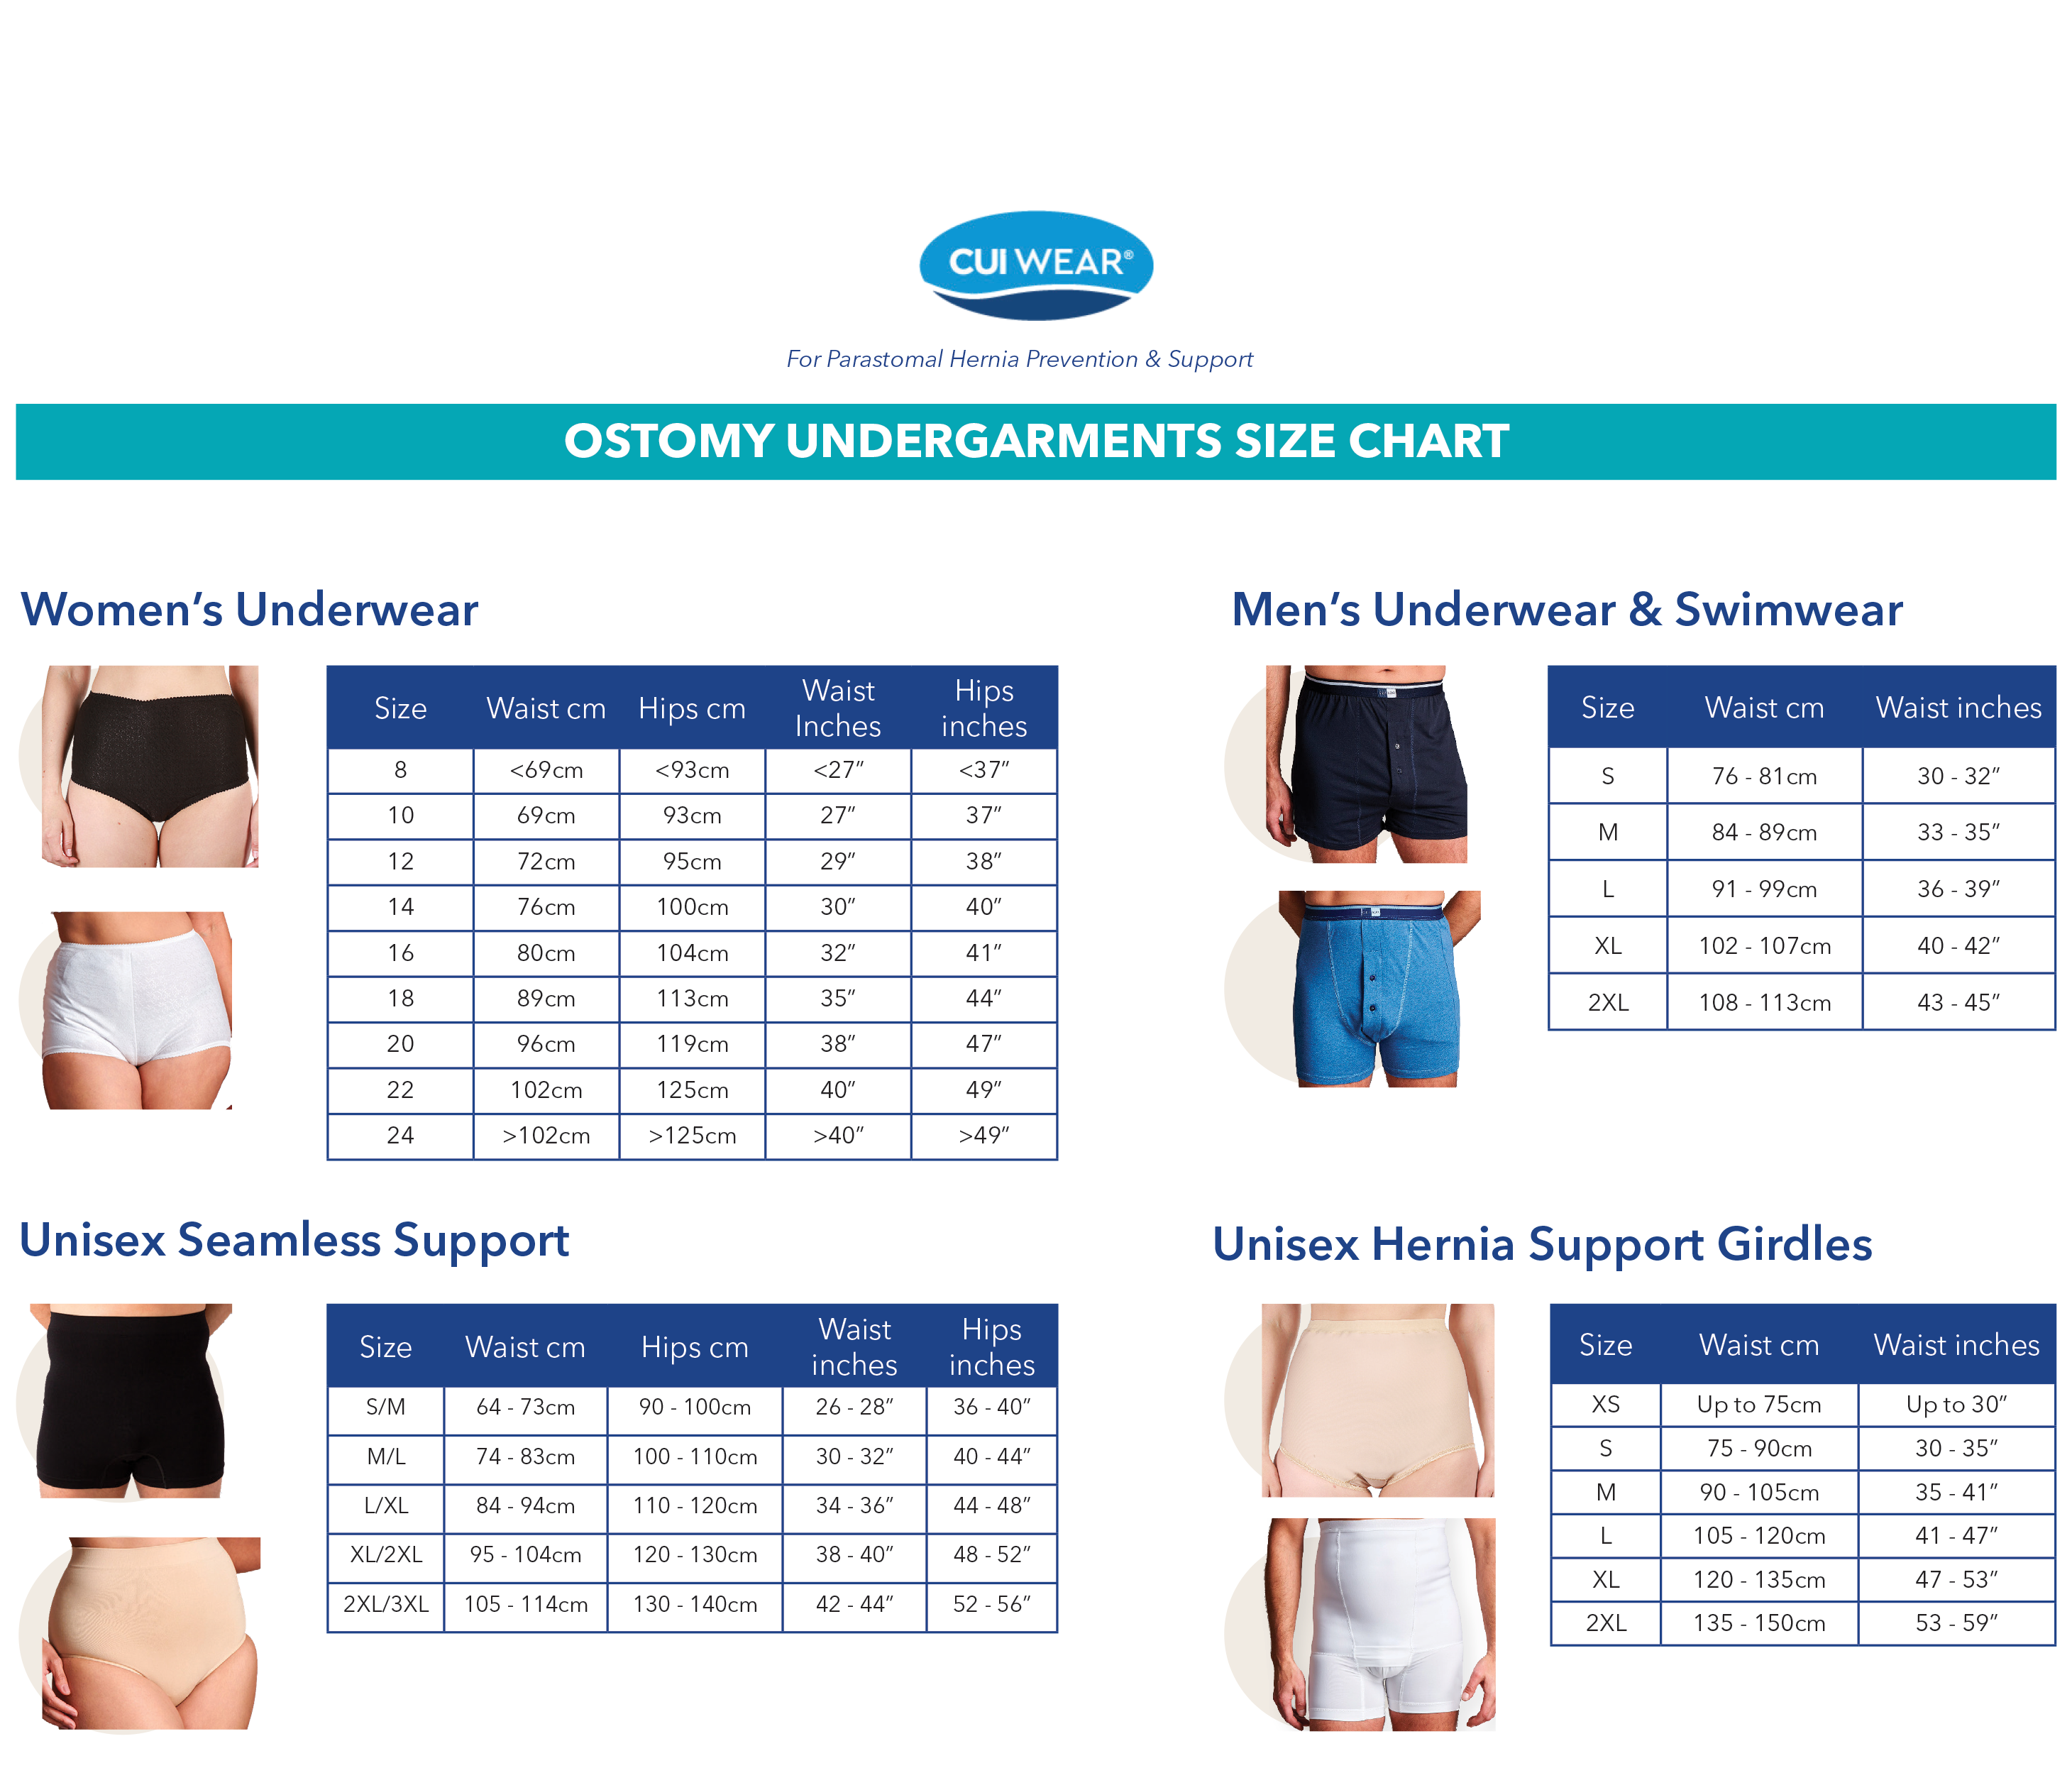 CUI Womens Ostomy Ultra-Lite Support Brief - 1 each, 10, WHITE - LEFT